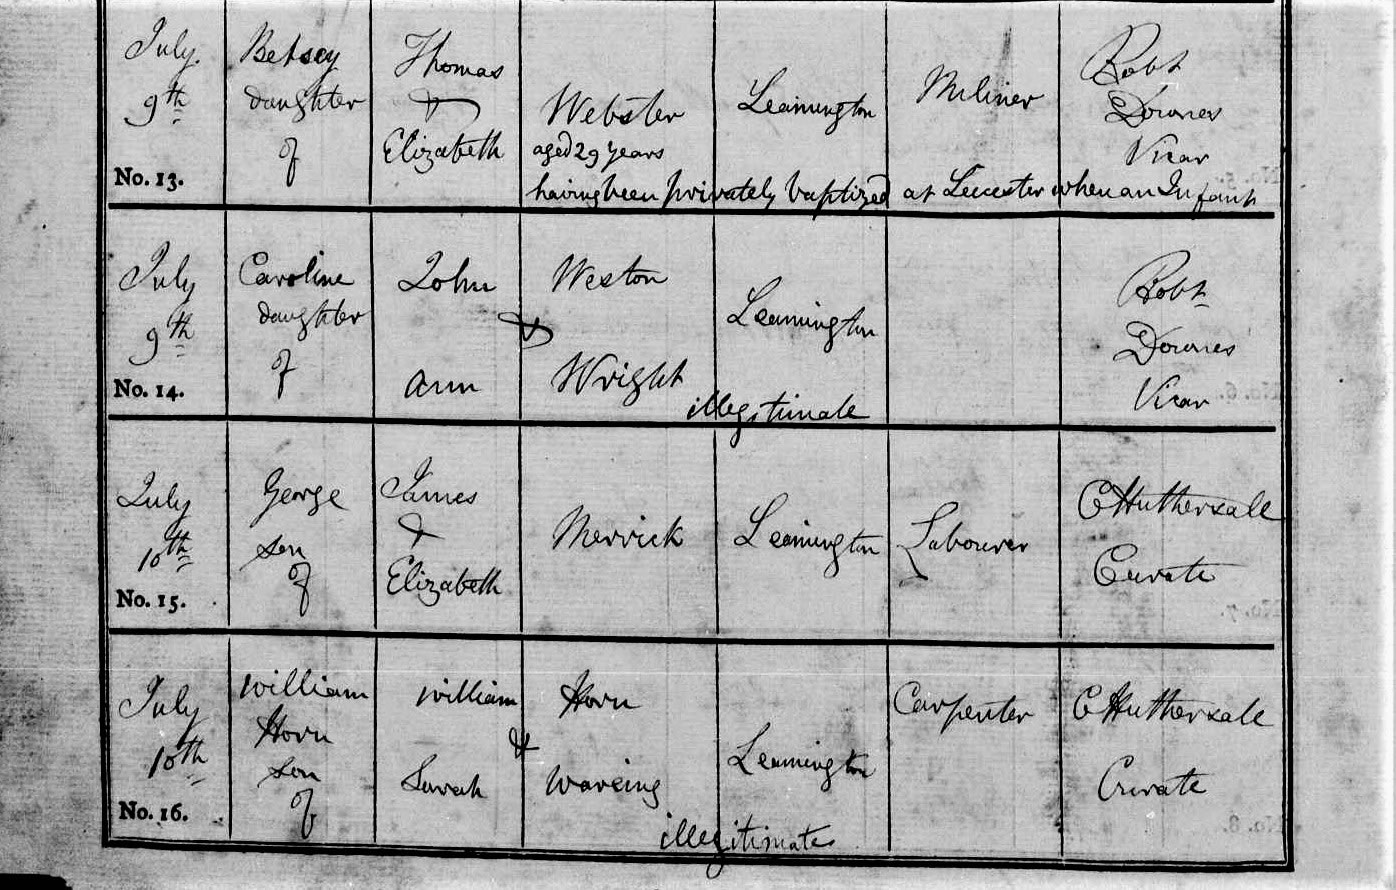 Some of the images reveal extra information on the page of the 1836 parish register